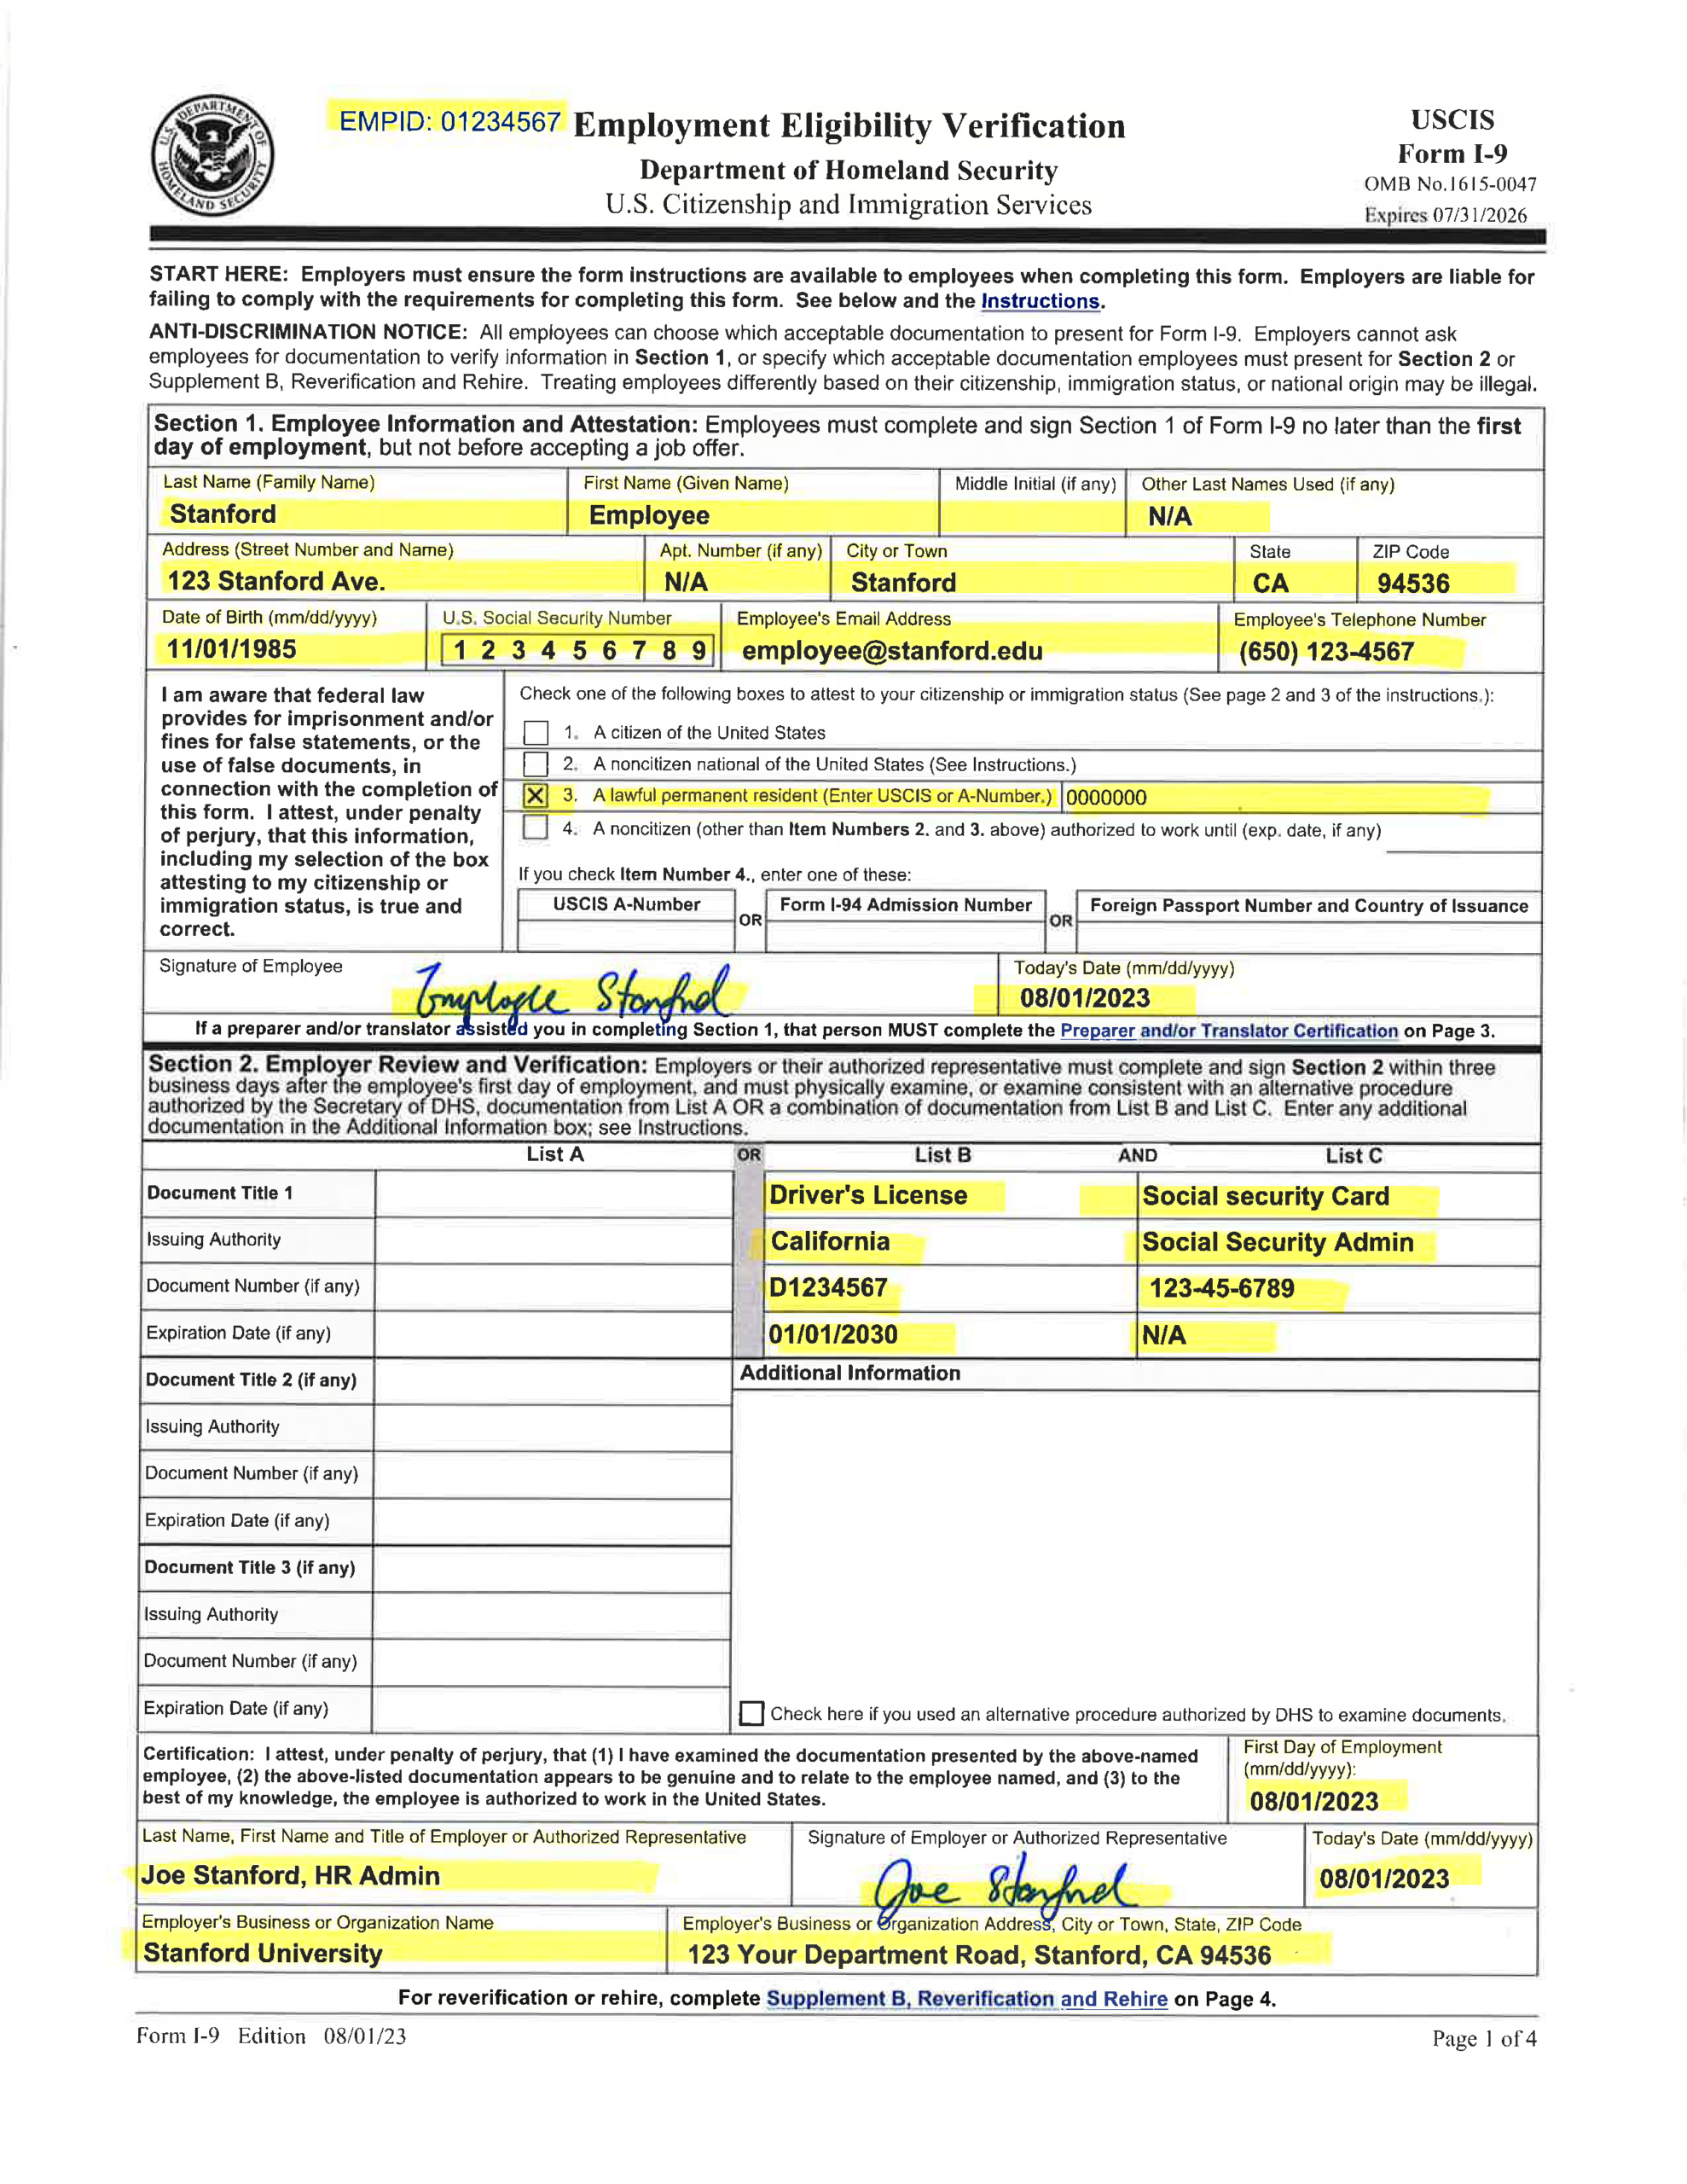 Examples Of Completed Form I-9 For Stanford intended for USCIS I 9 Form 2024